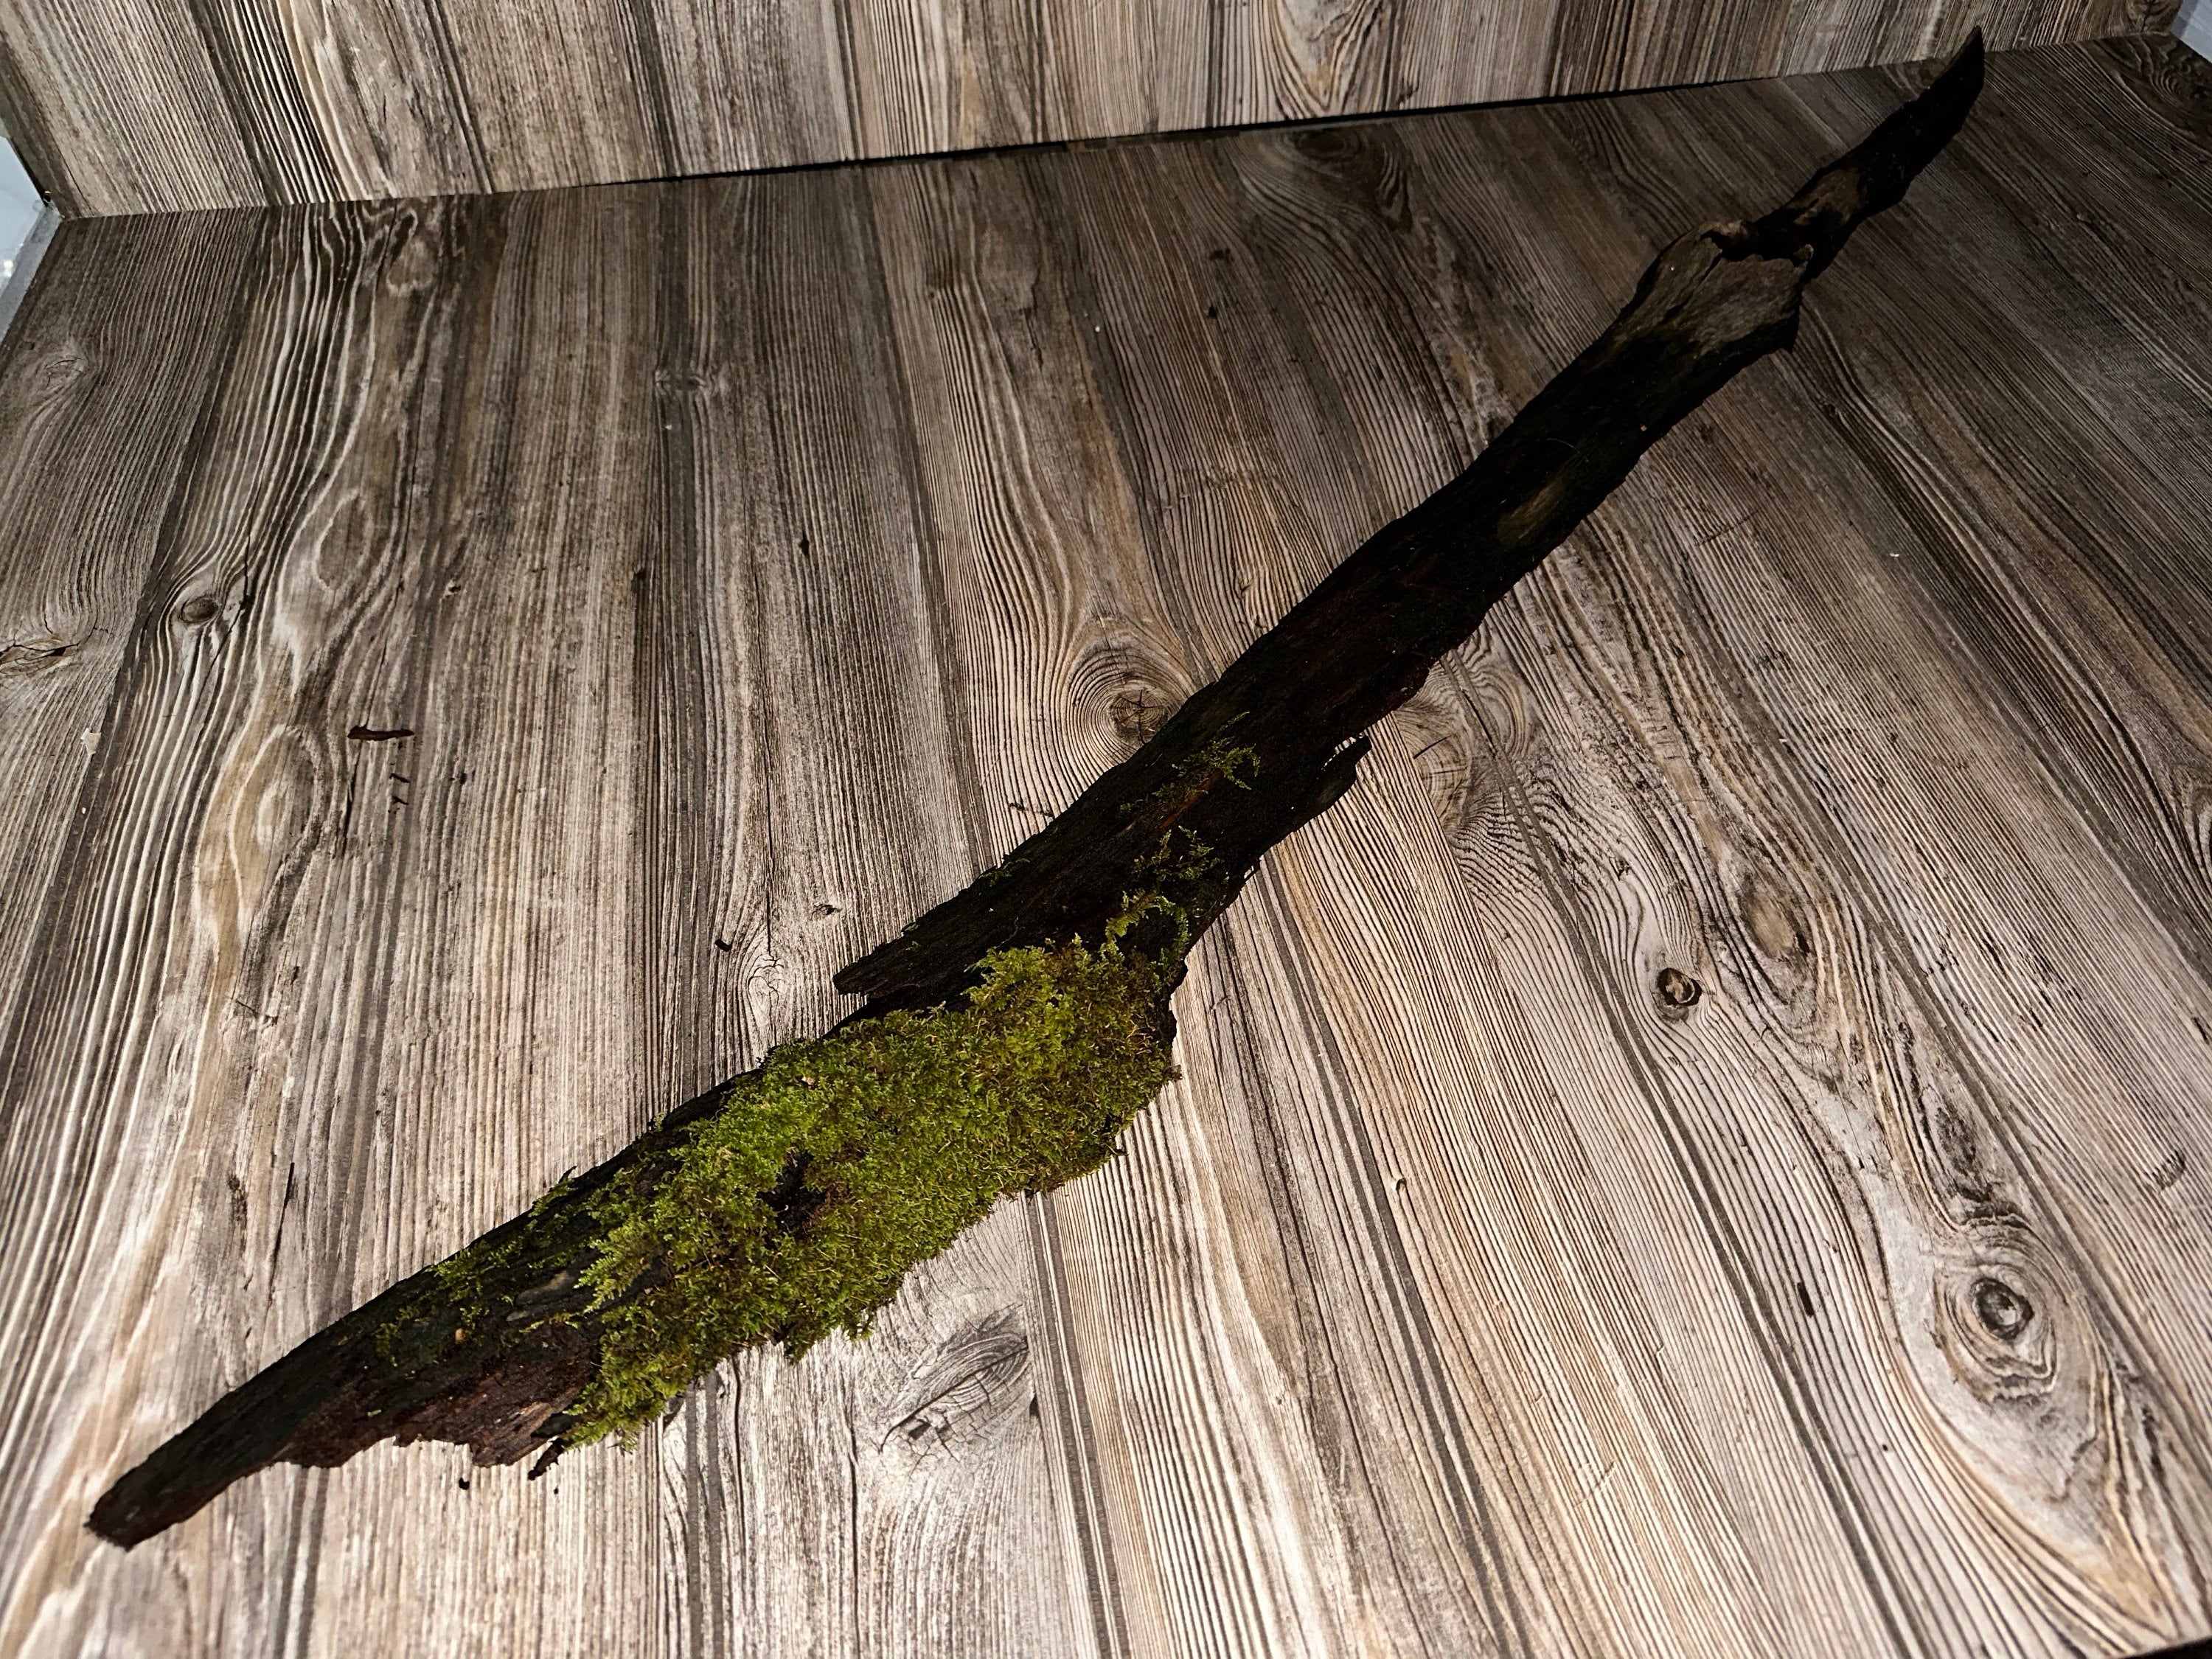 Large Mossy Log, Real Moss on Log, 43 Inches Long by 4 Inches Wide and 2 Inches High